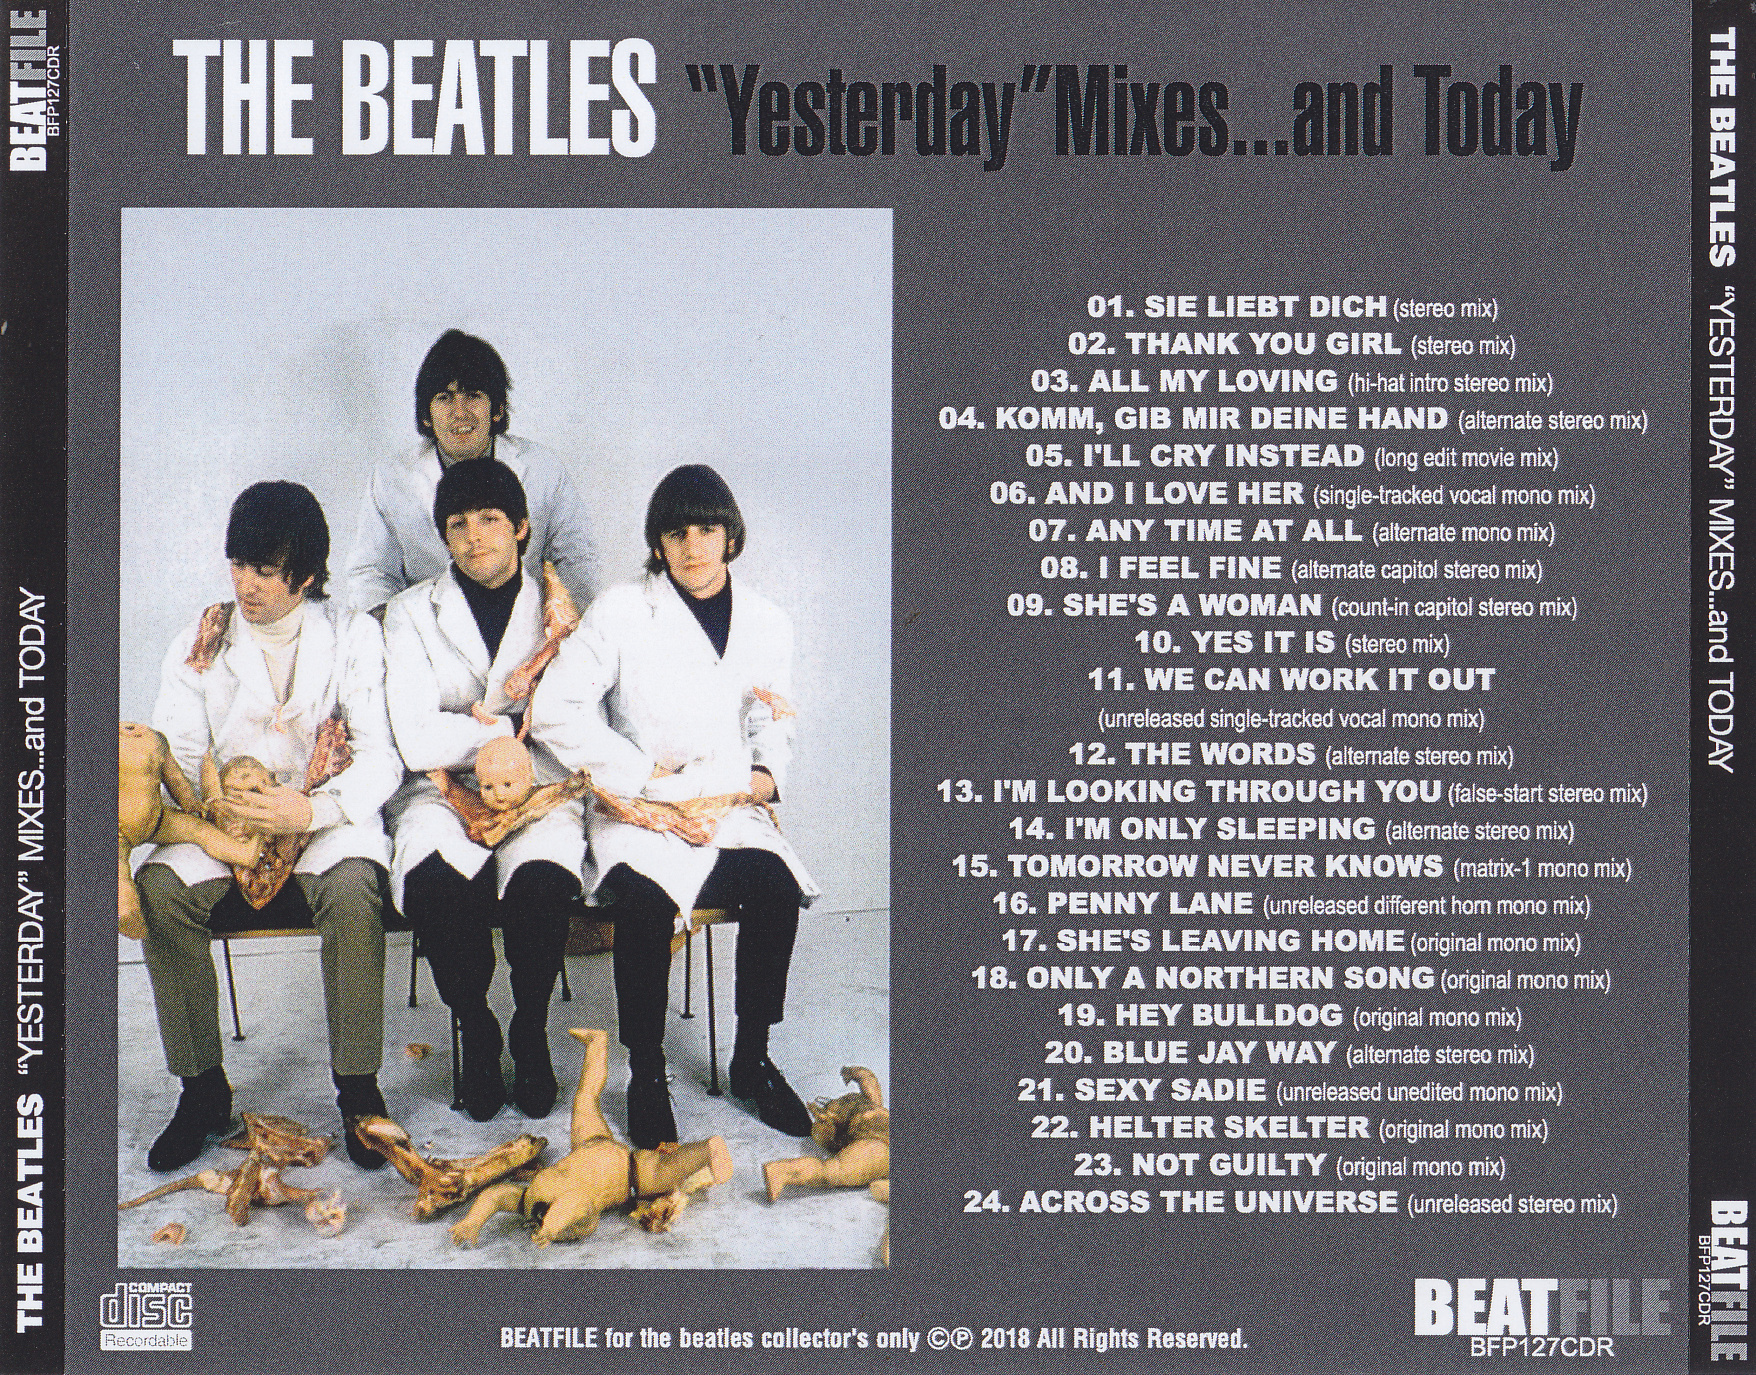 Beatles / Yesterday Mixes And Today A Collection Of The Beatles 